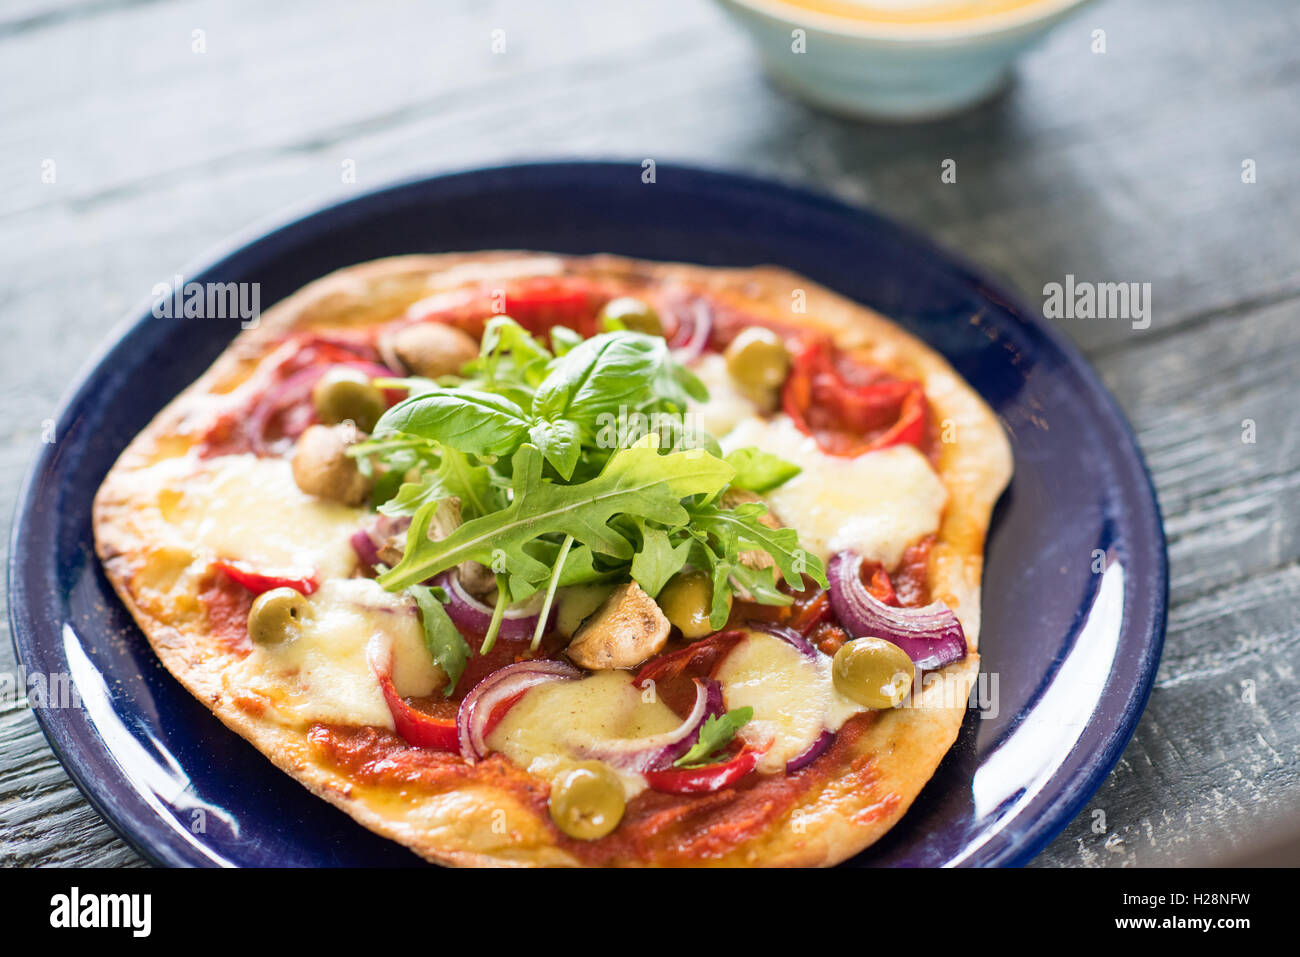 A rustic pizza on wooden table Stock Photo